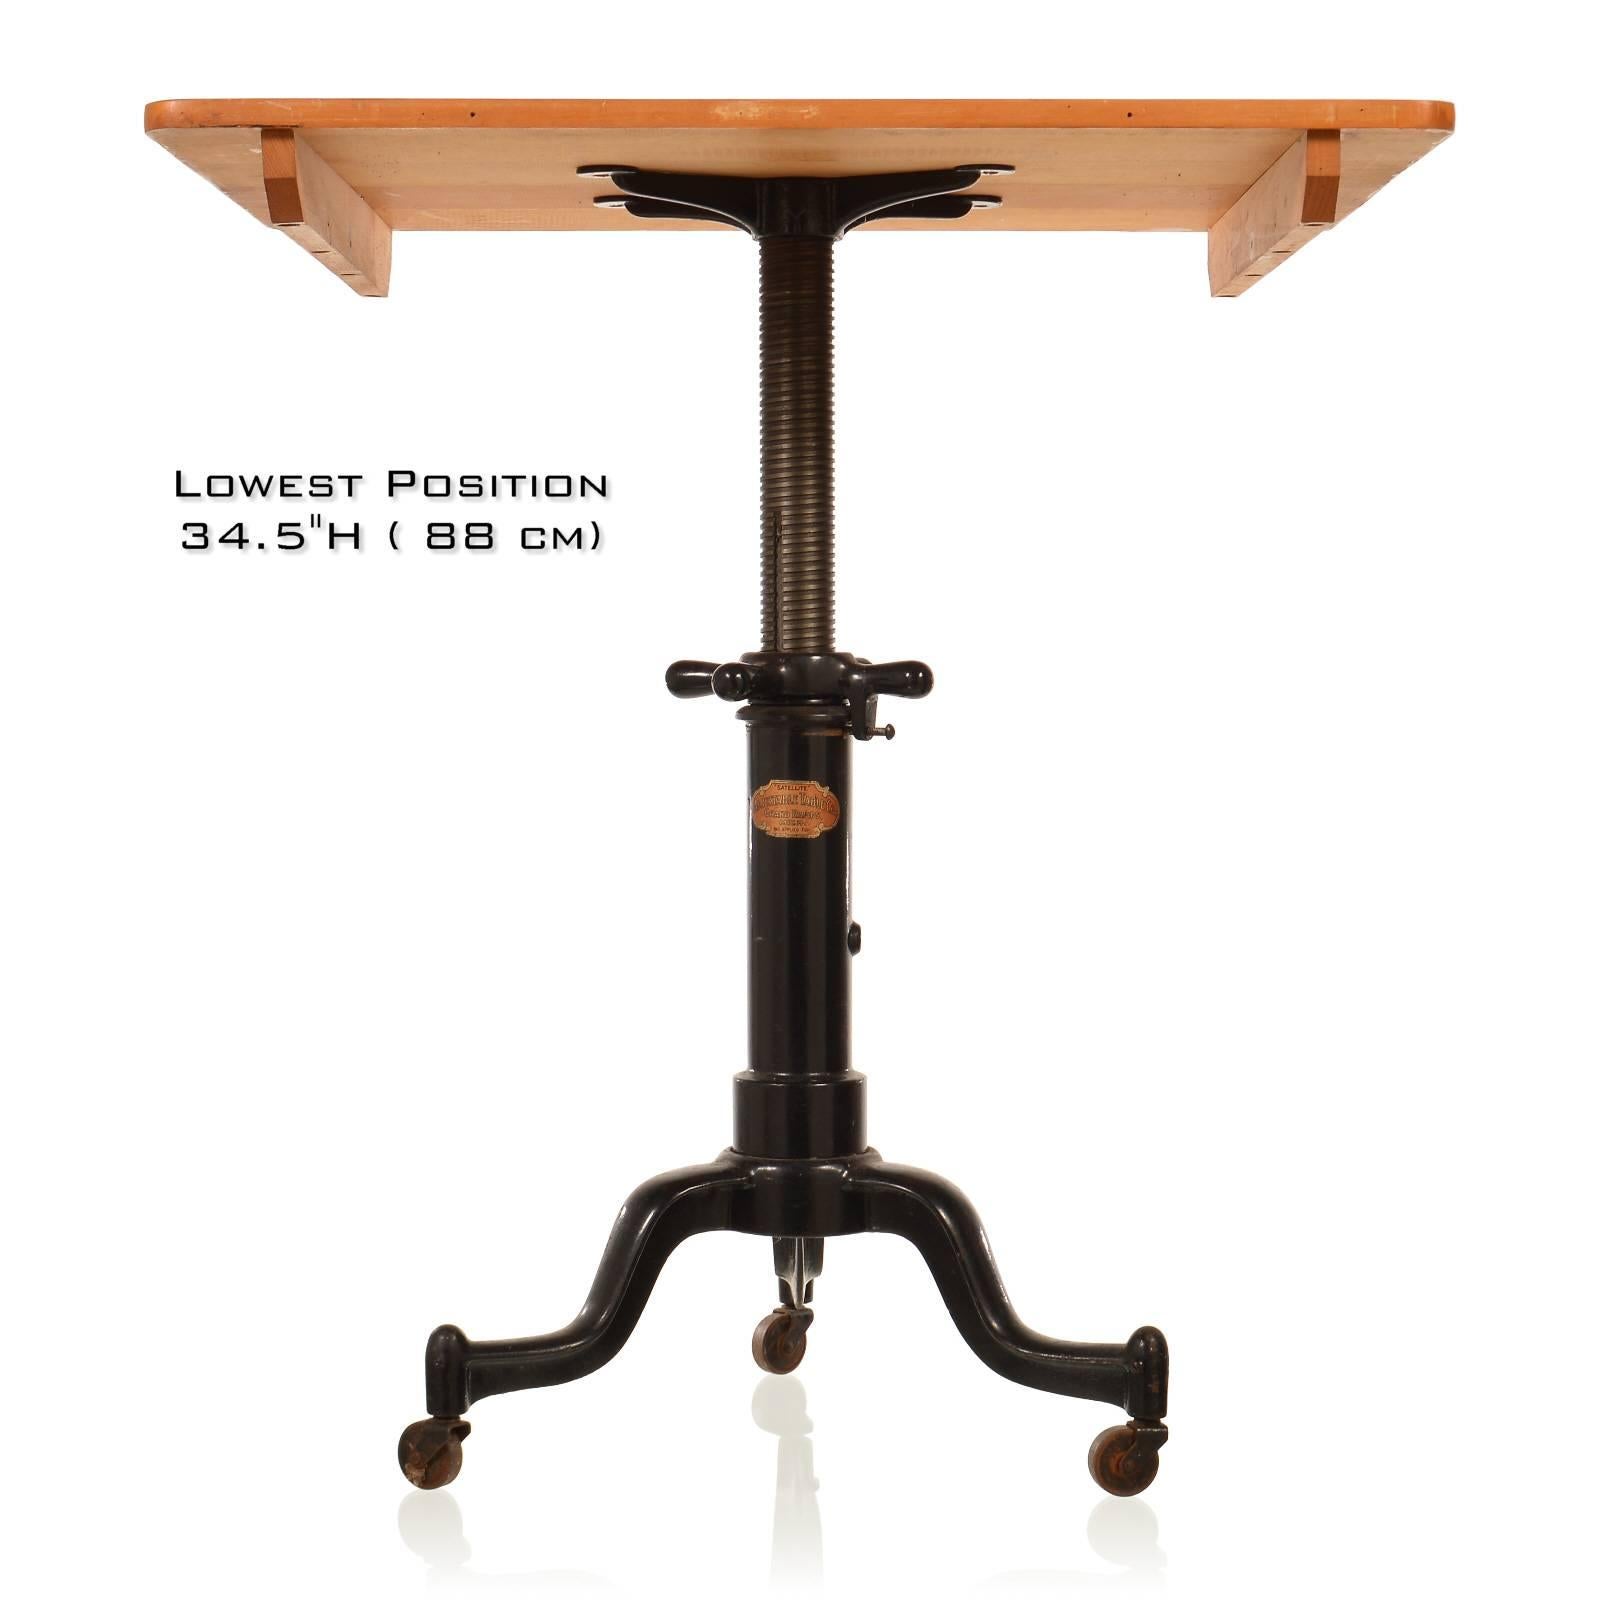 19th Century Satellite Industrial Table with Adjustable Screw Base